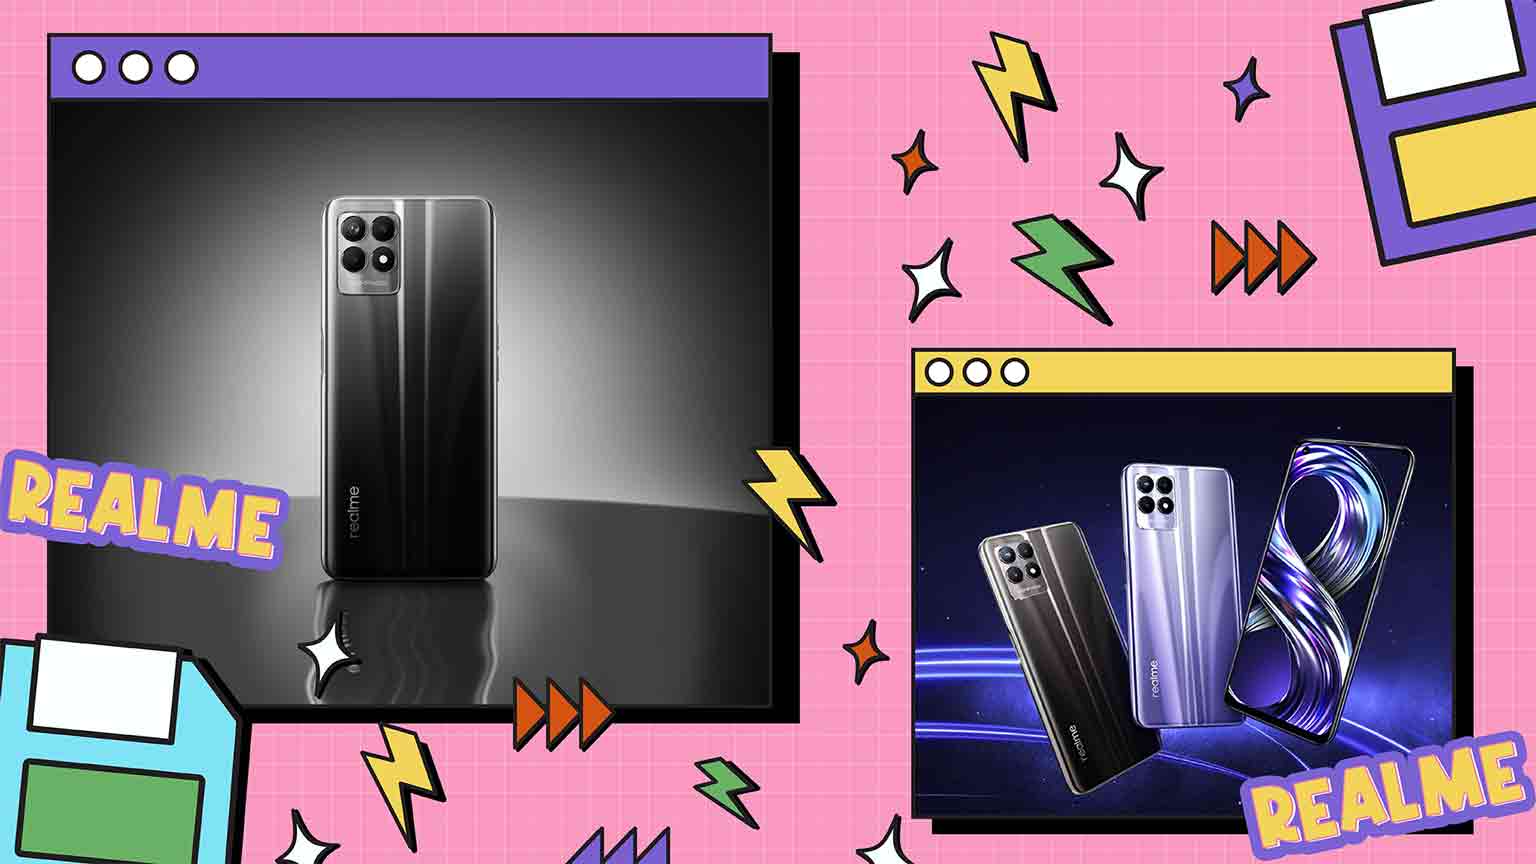 Heads Up: You Can Get realme’s Newest Smartphone, The realme 8i, For P1000 Off This Weekend